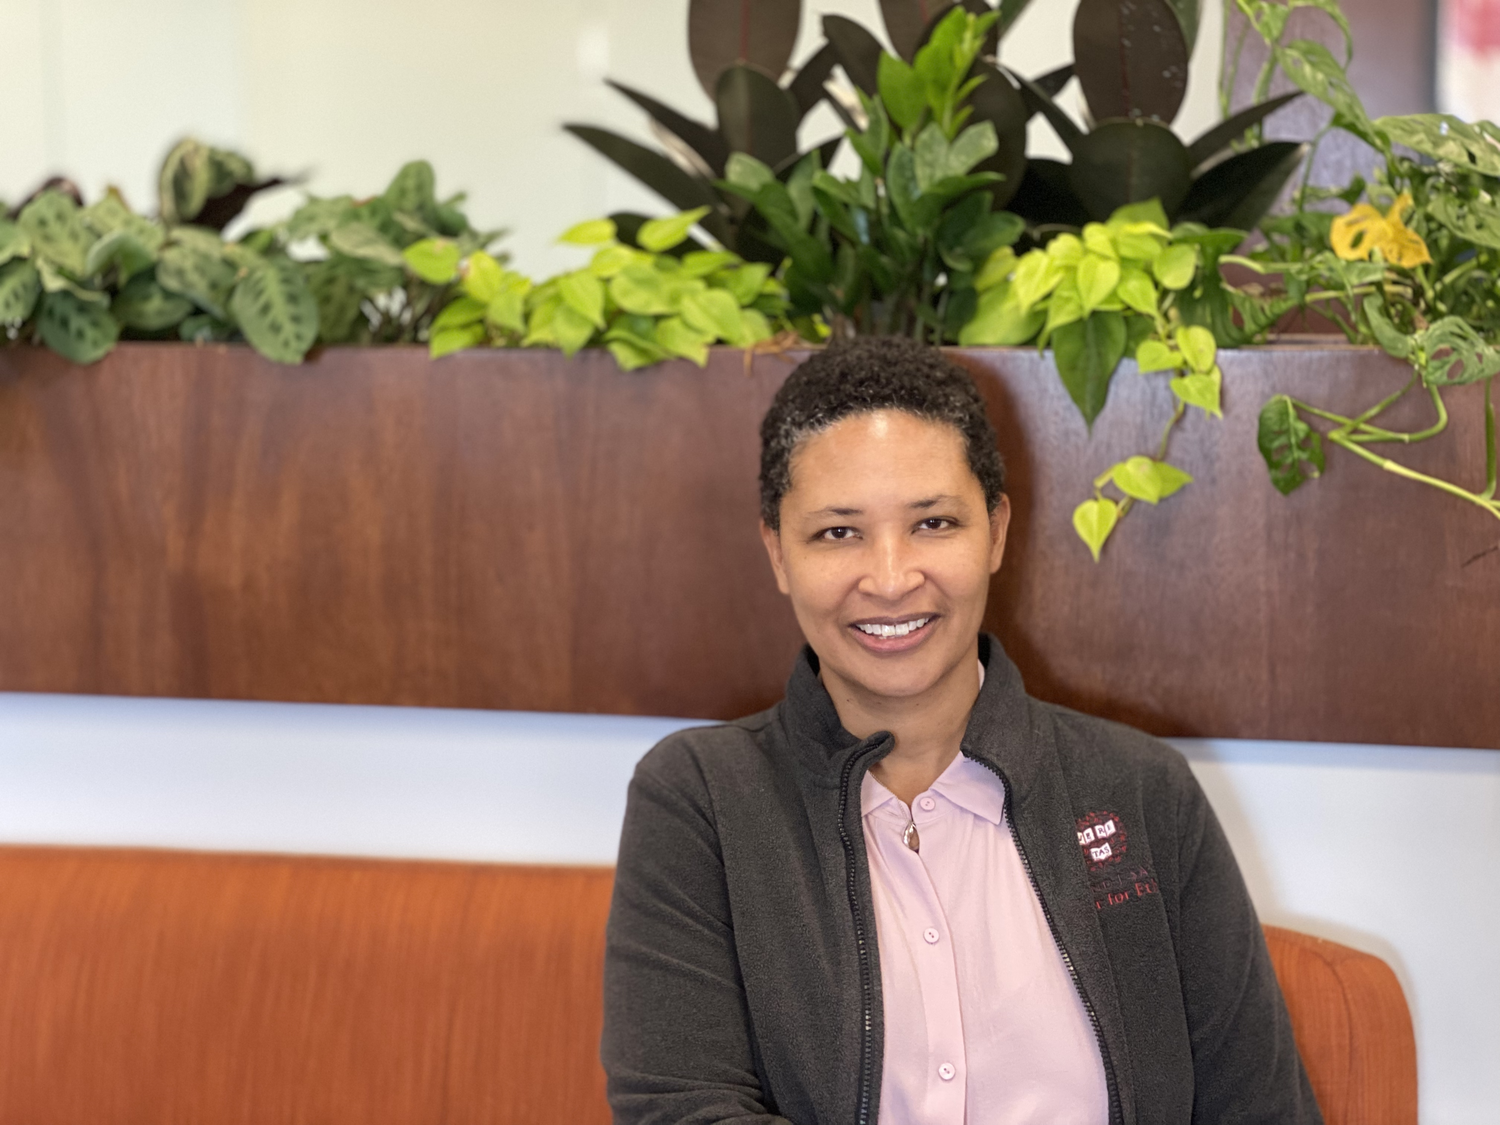 Danielle S. Allen is a University Professor, Harvard's highest faculty title, and ran for Massachusetts governor before suspending her campaign in 2022.